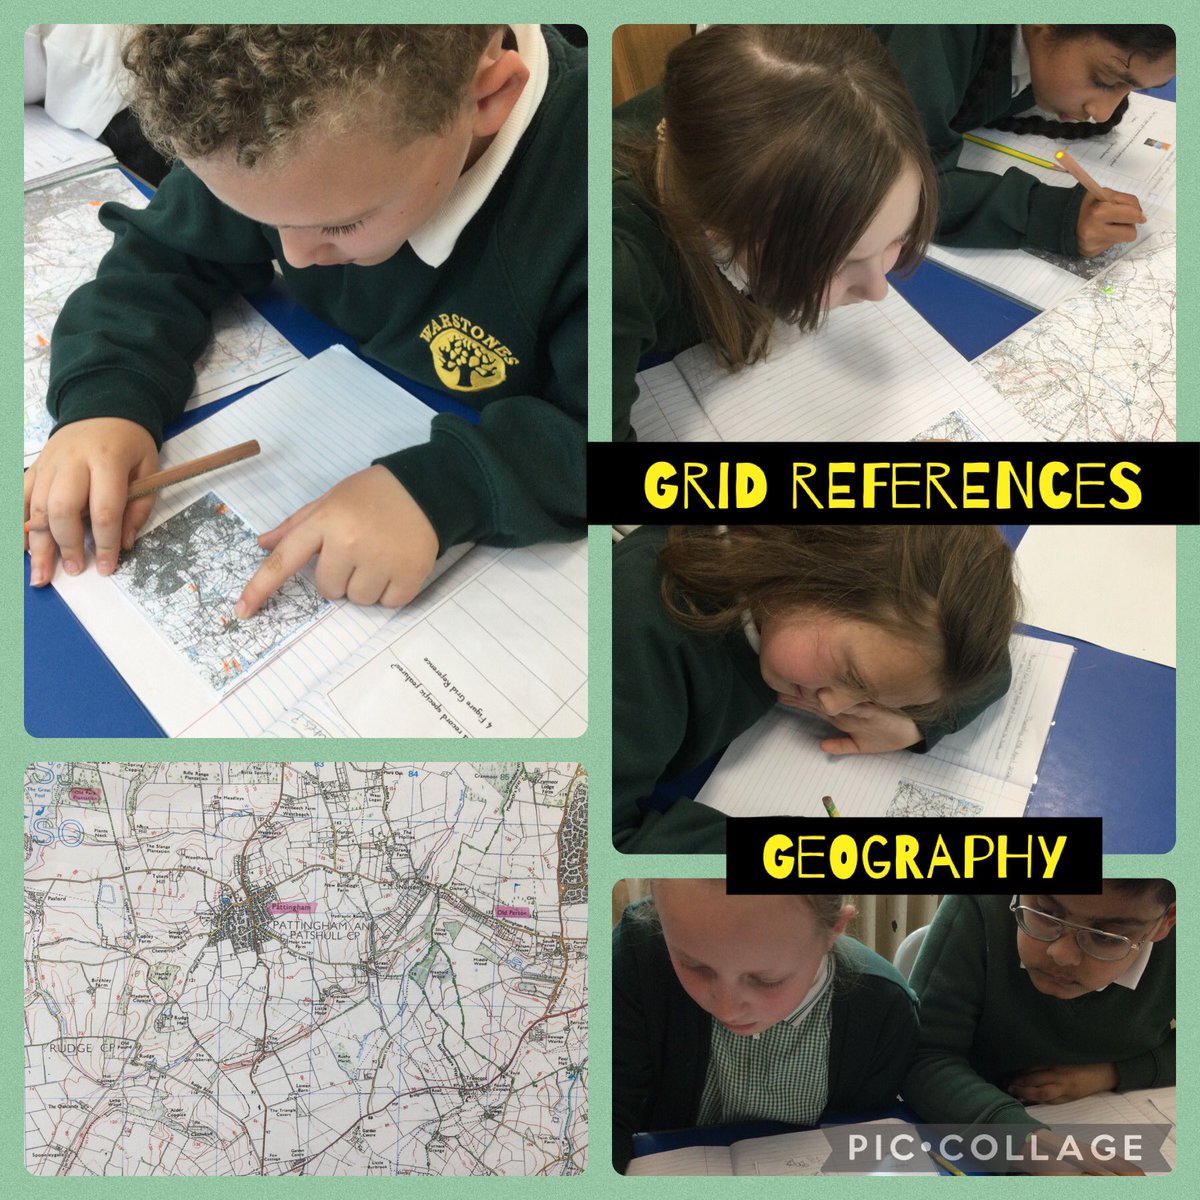 Today the children were learning how to use four figure grid references on an ordnance survey map to locate places of interest or geographical features! 🕵️‍♂️🌍 #Year3 #Geography #OrdnanceSurveyMap #GridReferences @WarstonesP